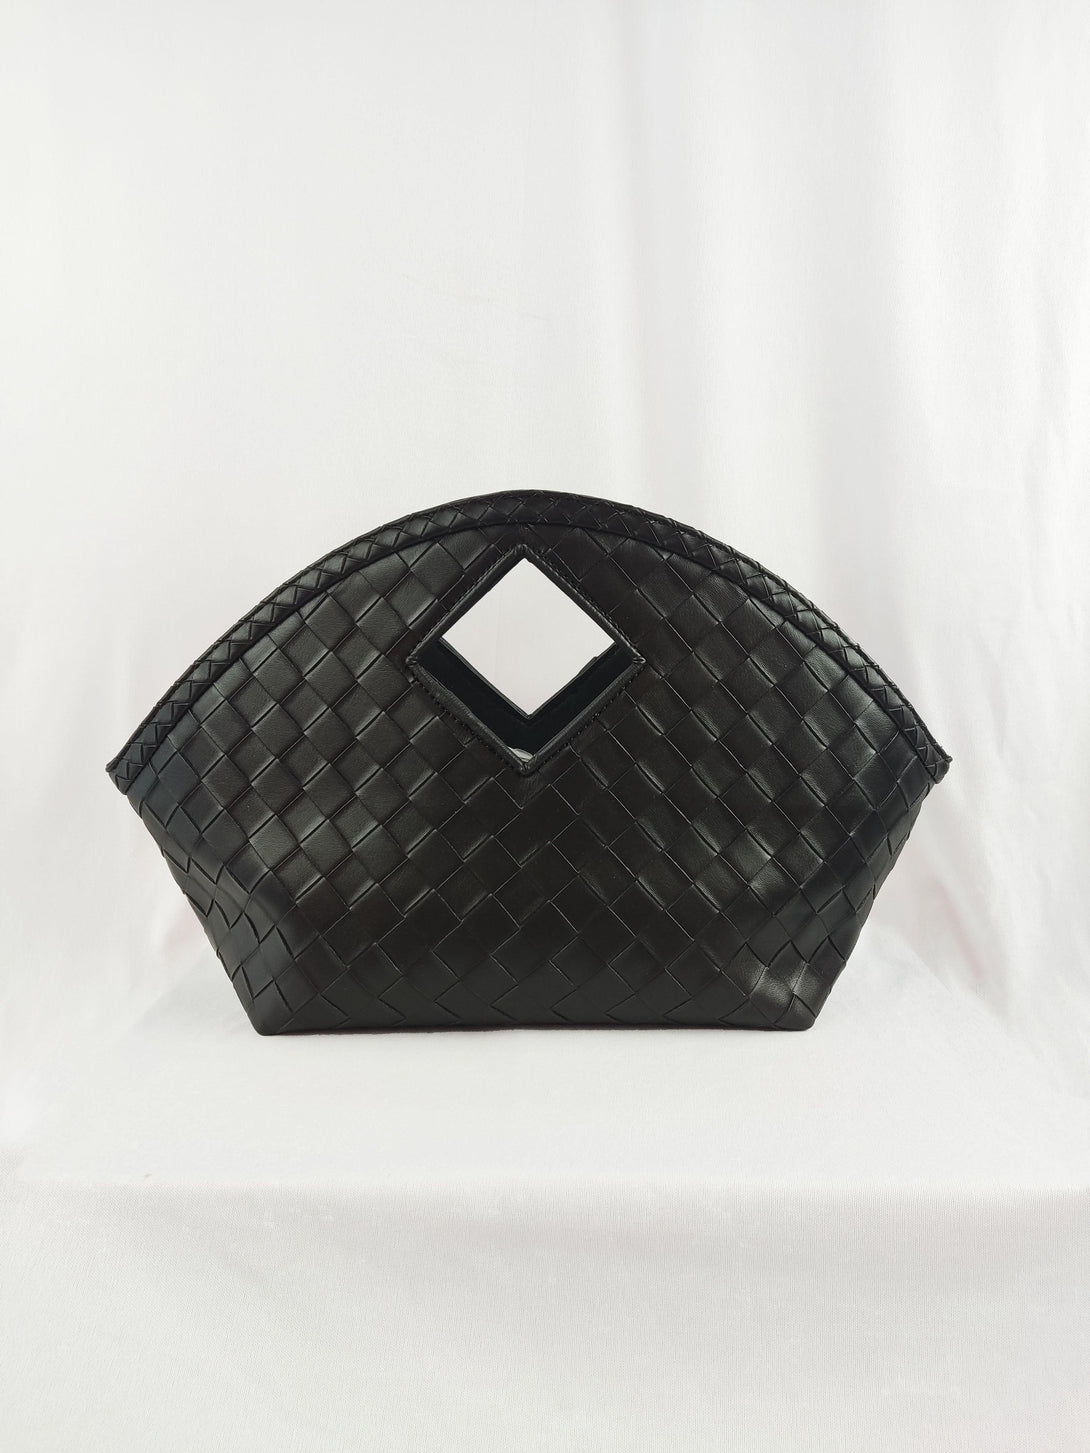 Phyllis Woven PU Leather Clutch Bag in Black - Pink N' Proper